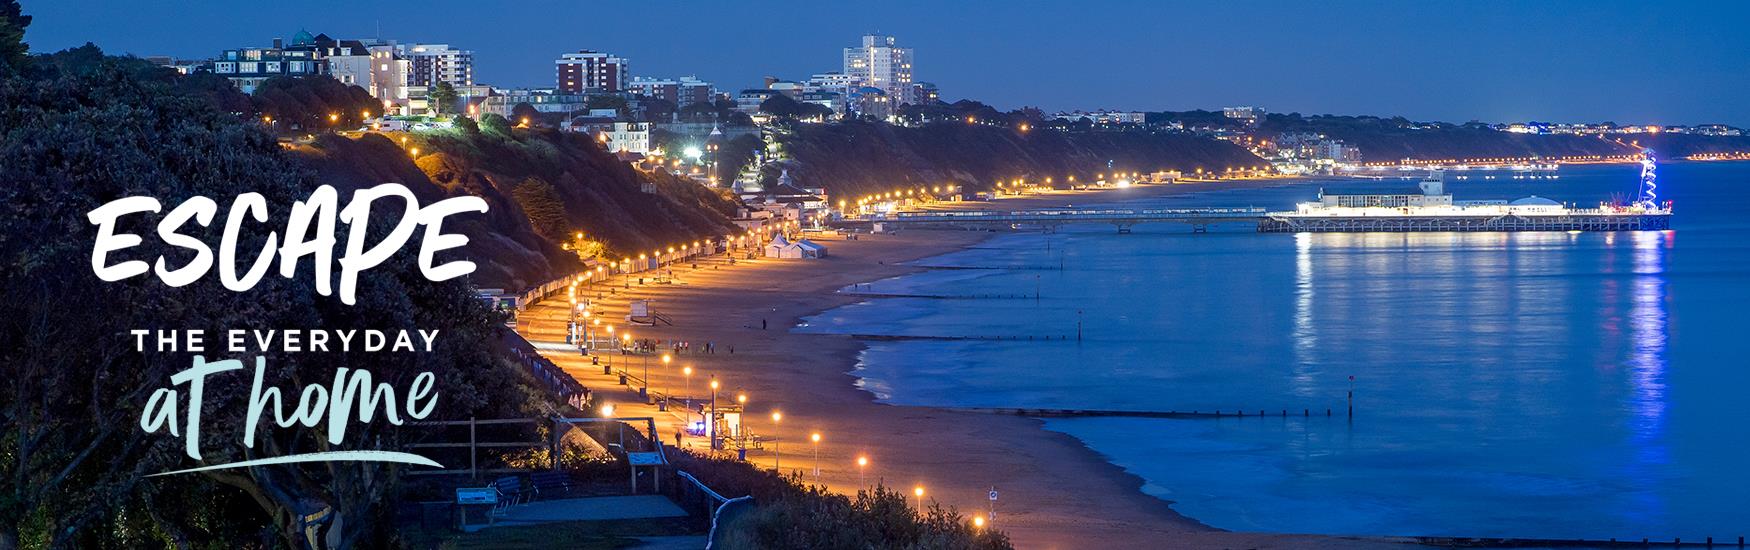 Bournemouth Bay lit up at night with the text Escape the Everyday at home